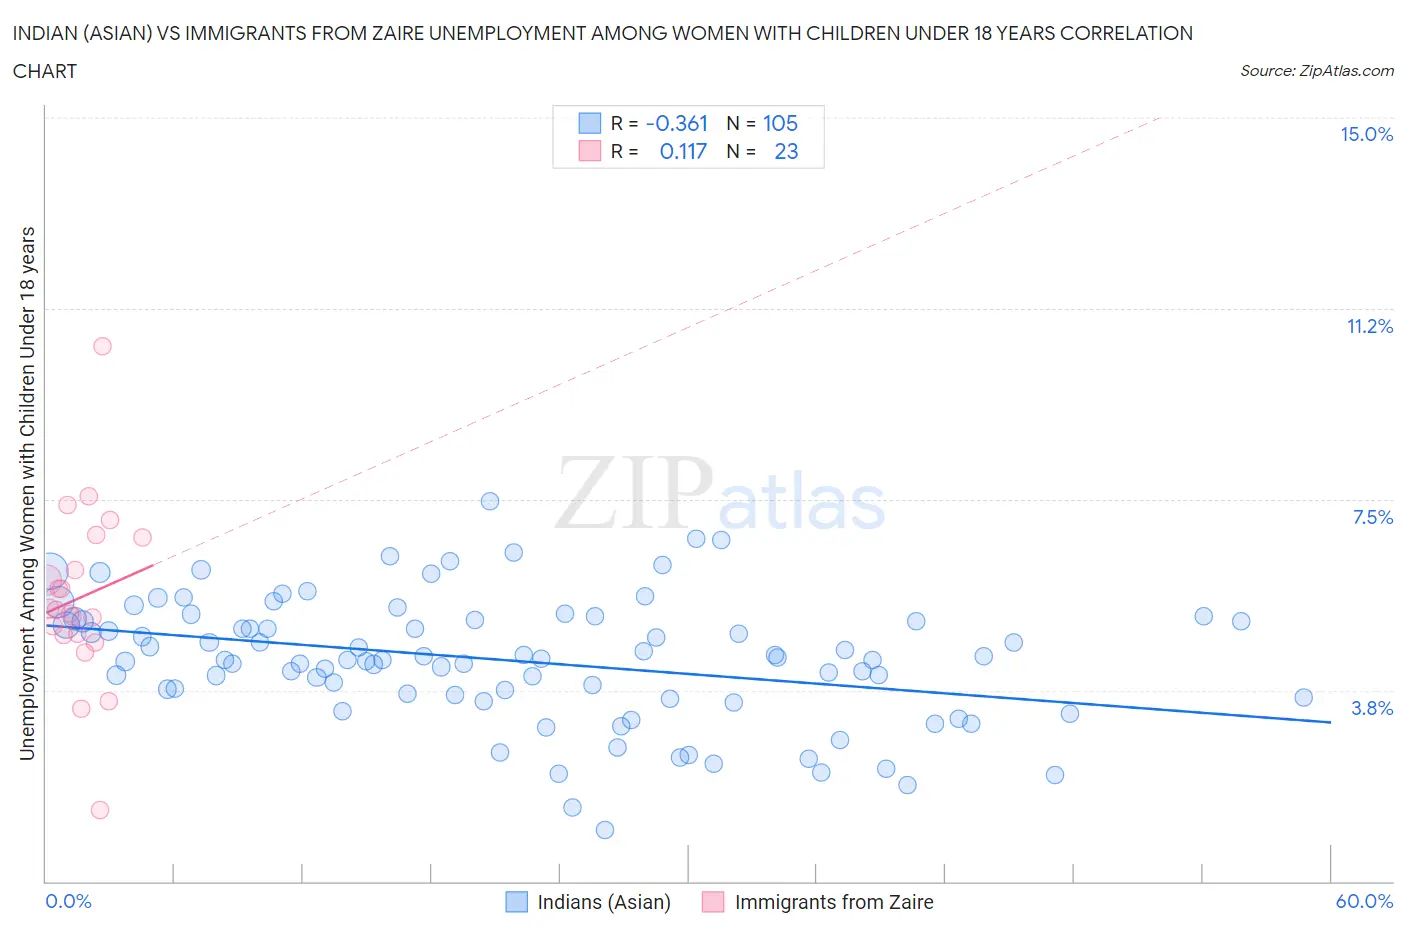 Indian (Asian) vs Immigrants from Zaire Unemployment Among Women with Children Under 18 years